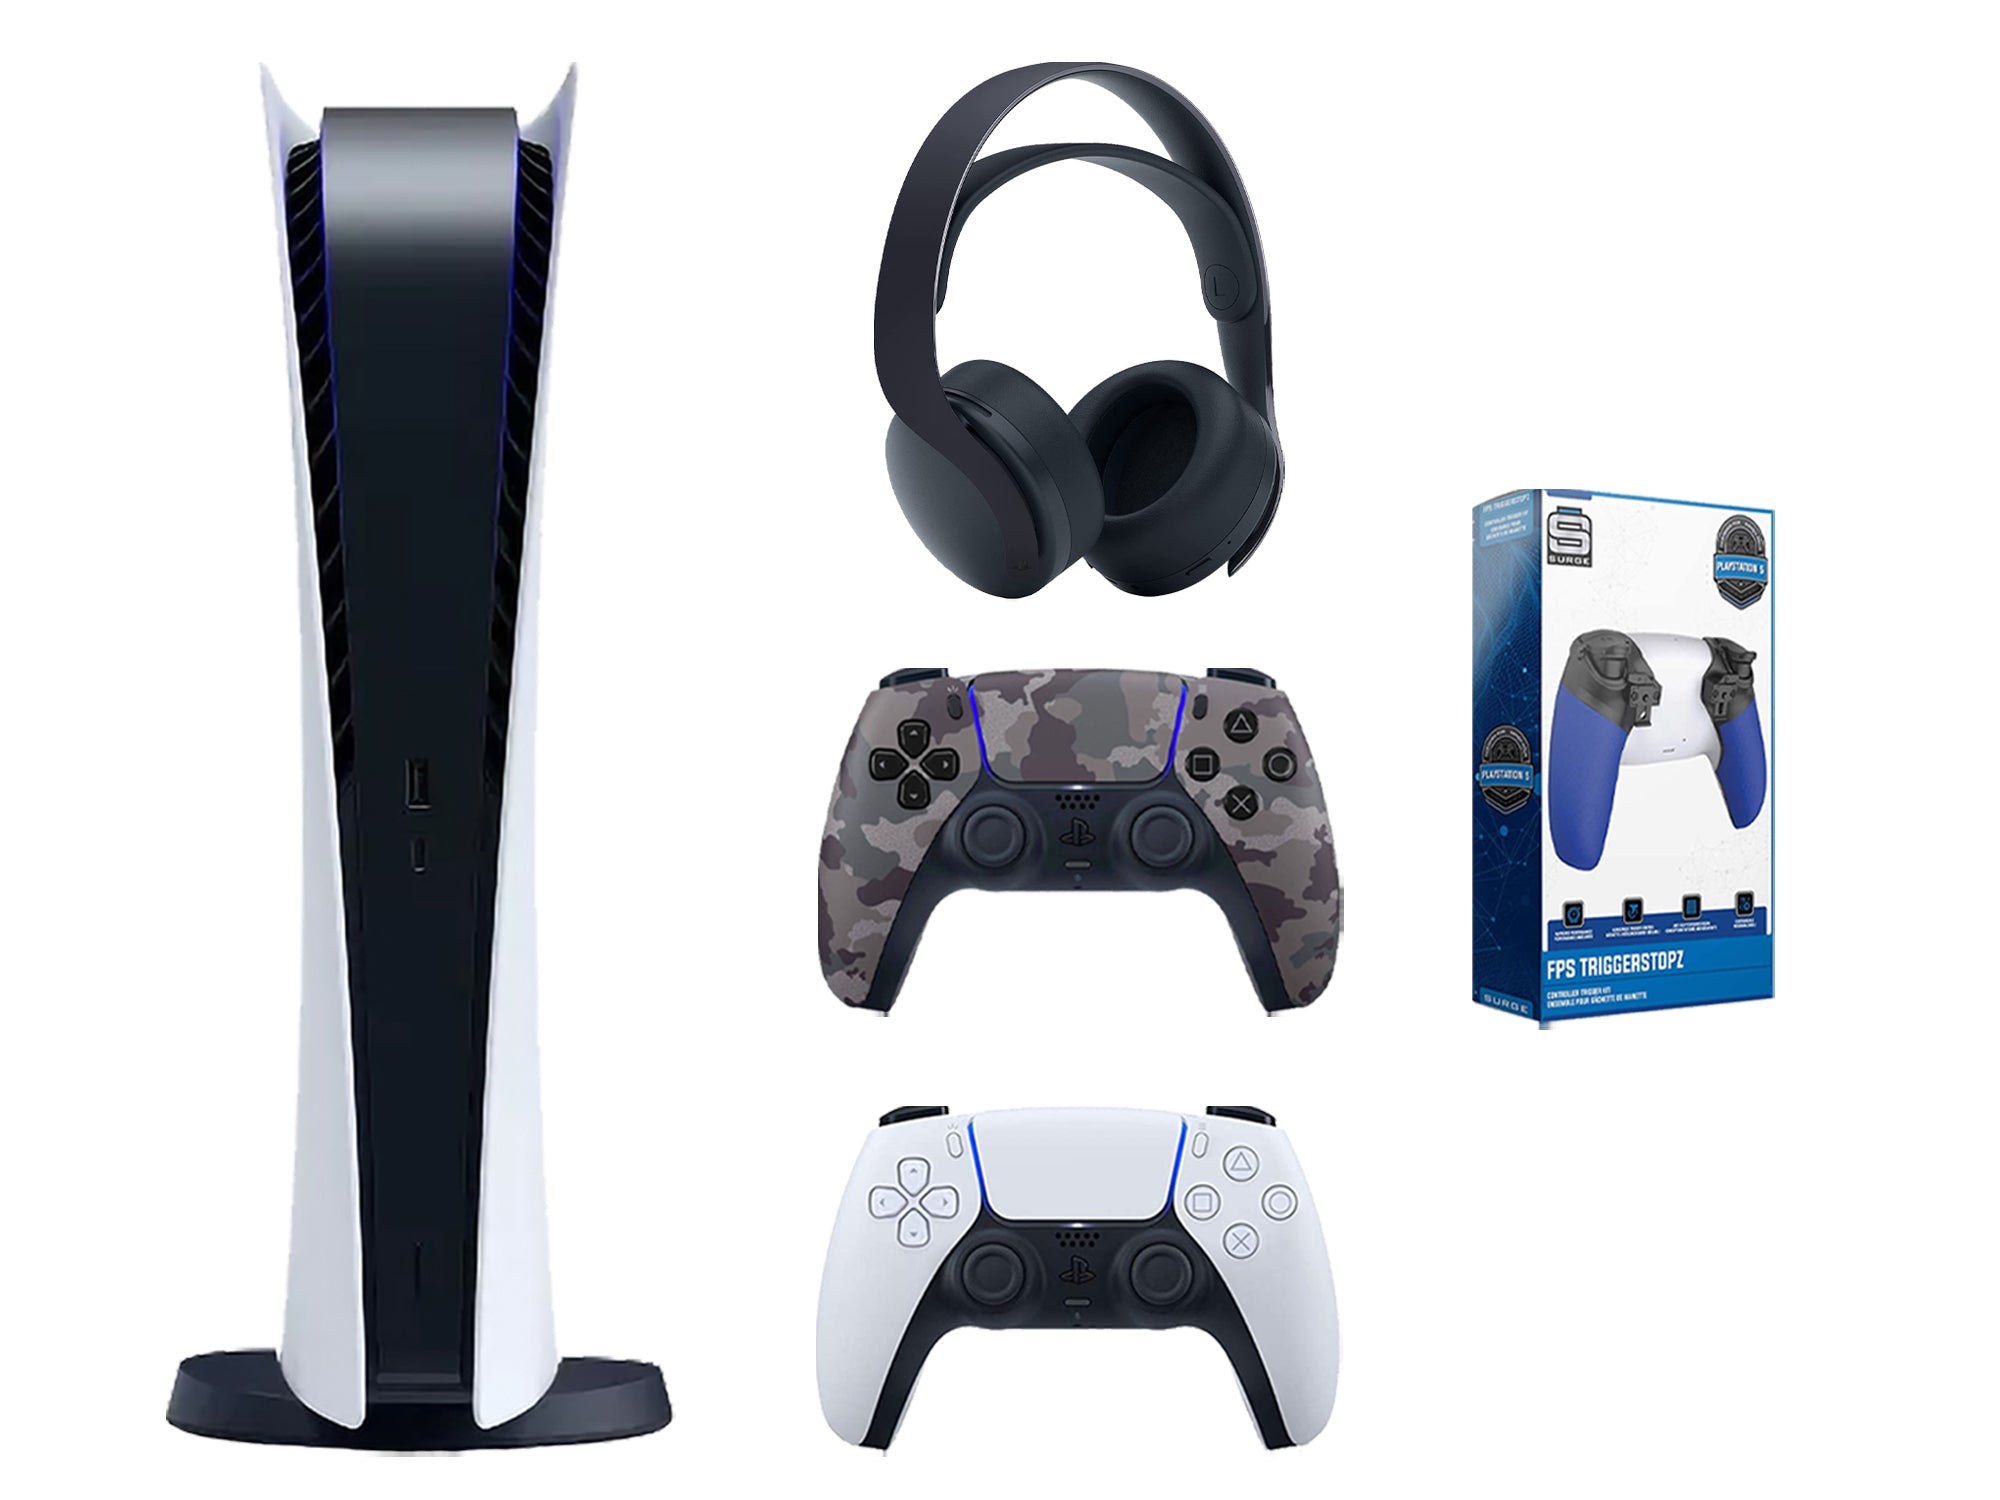 Sony Playstation 5 Digital Edition Bundle with Extra Gray Camo Controller, Black PULSE 3D Wireless Headset and Trigger Kit - Pro-Distributing